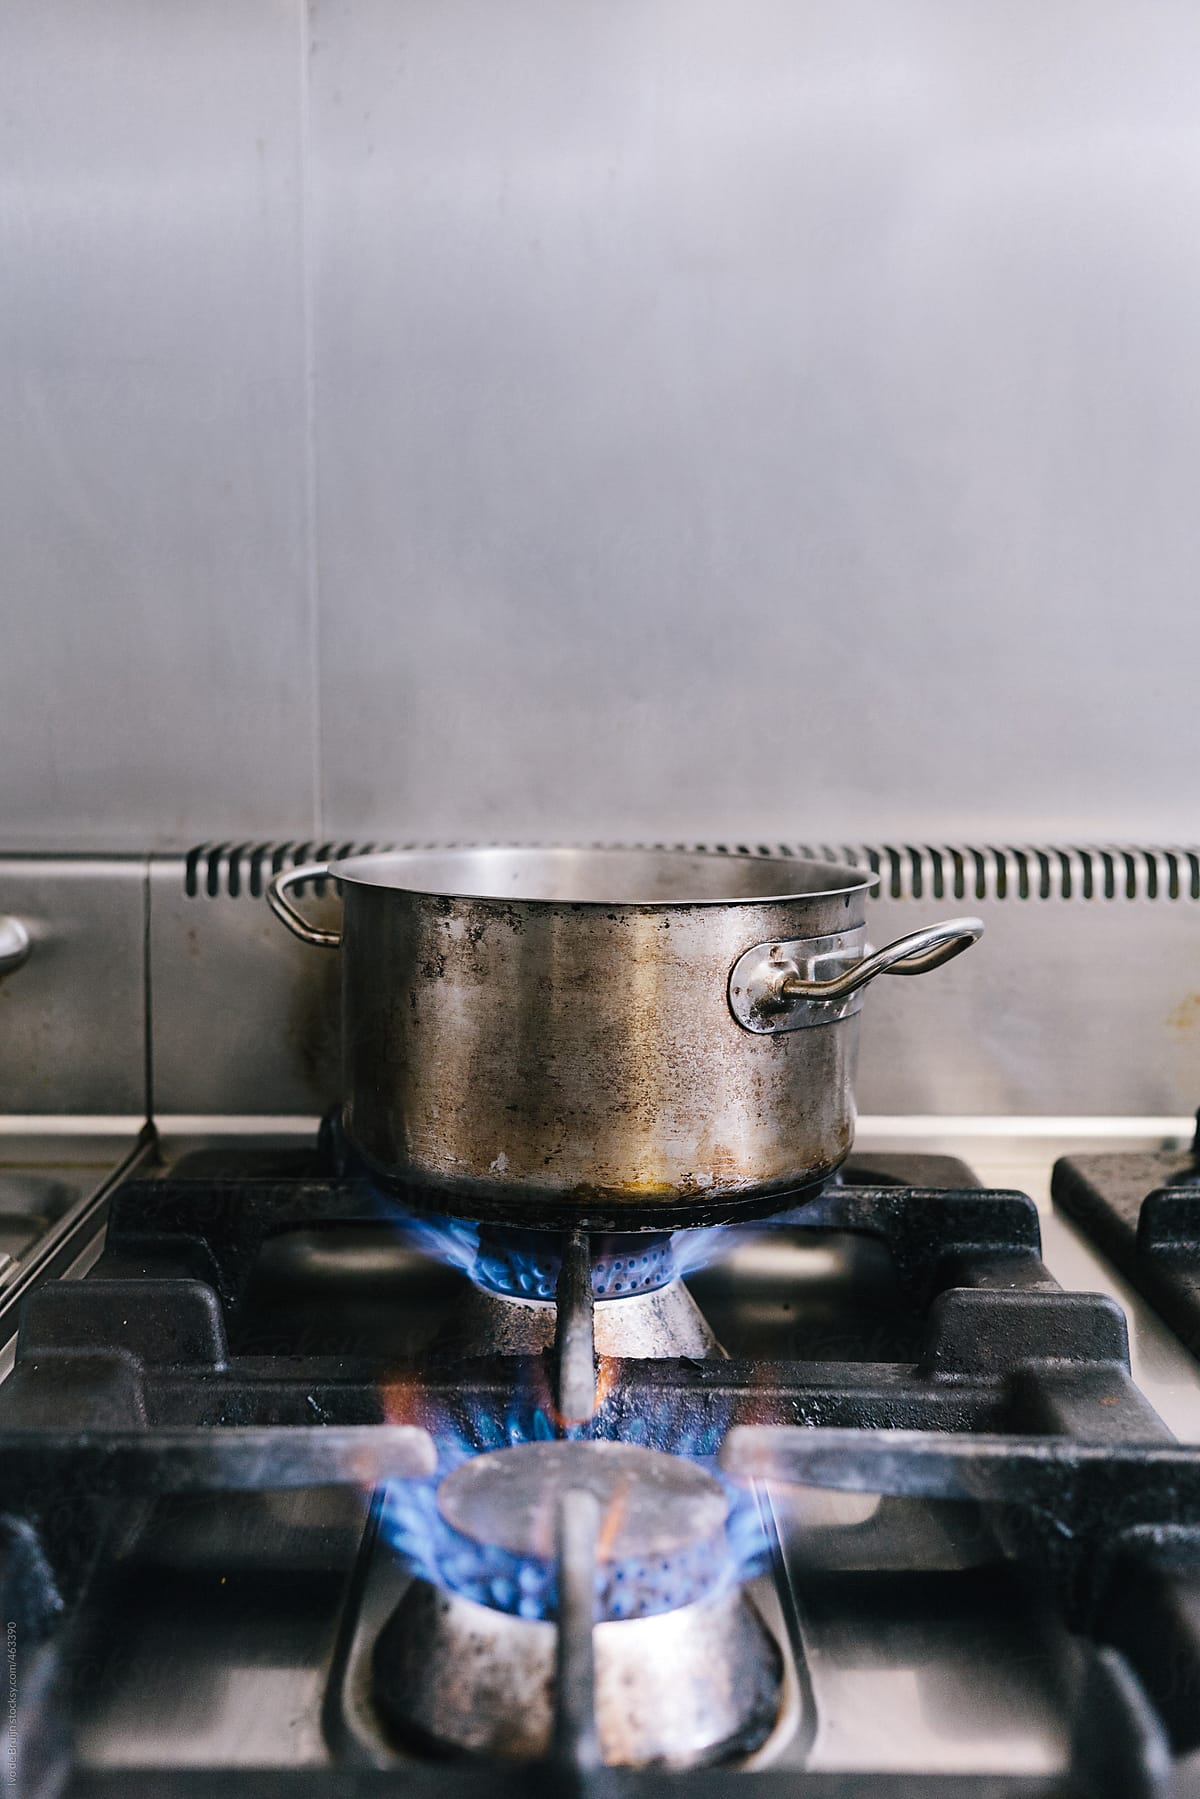 A pan with water being heated on a stove